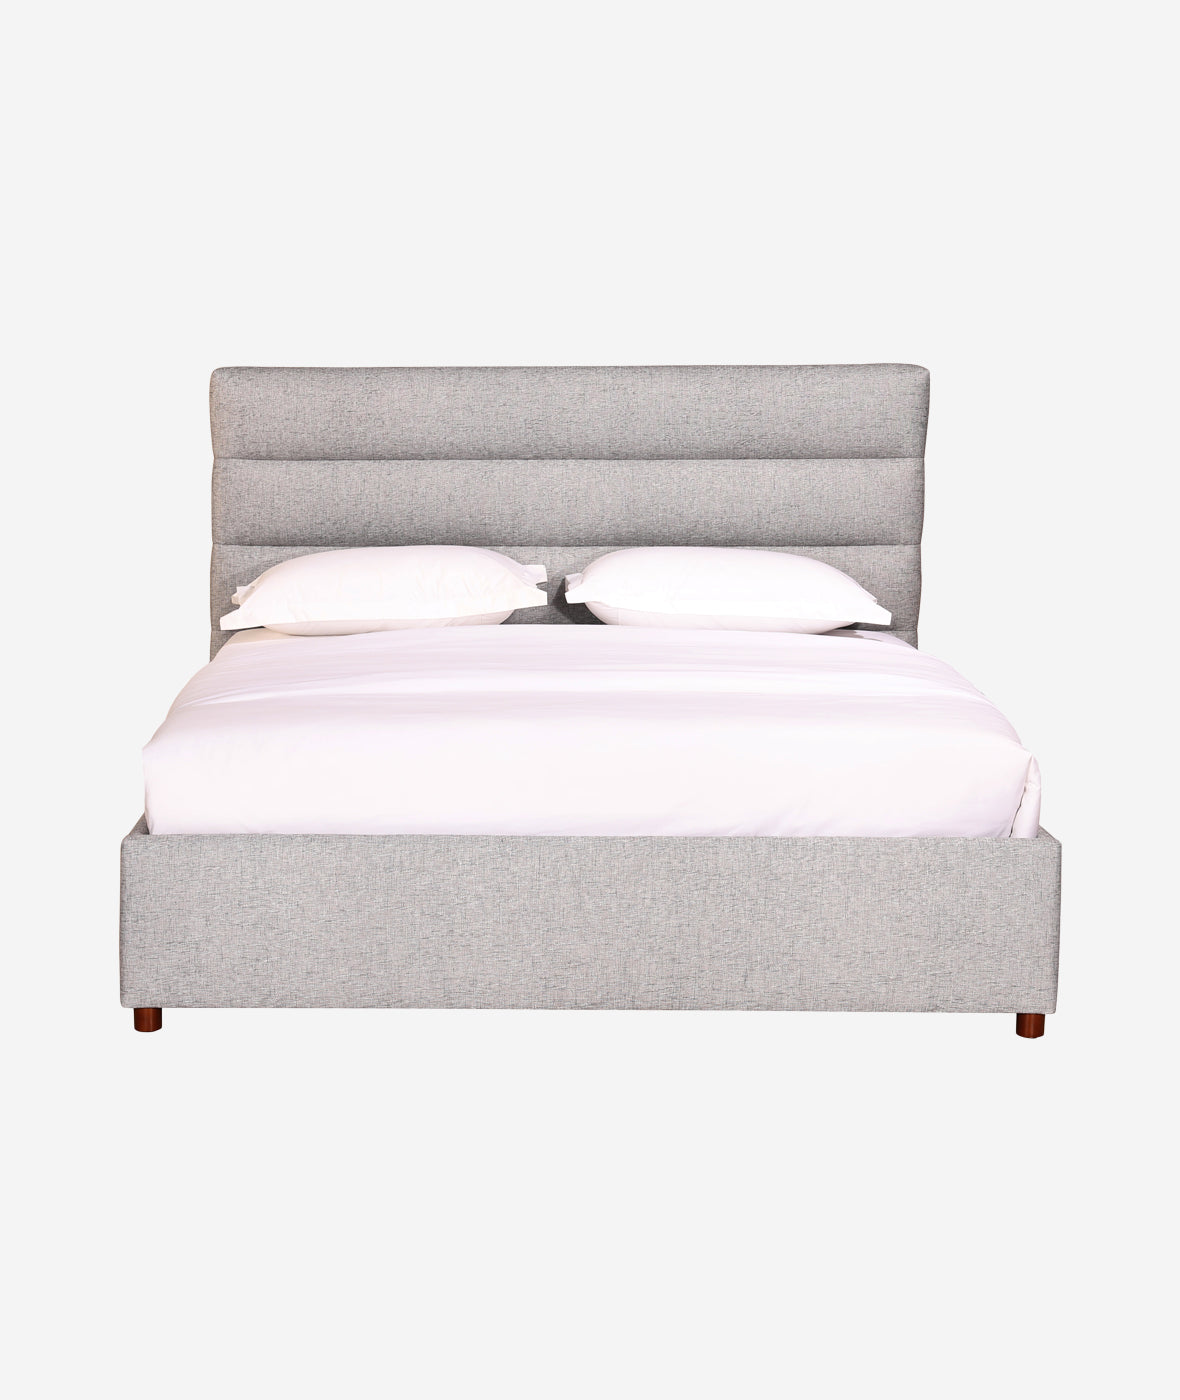 Takio Bed - More Options